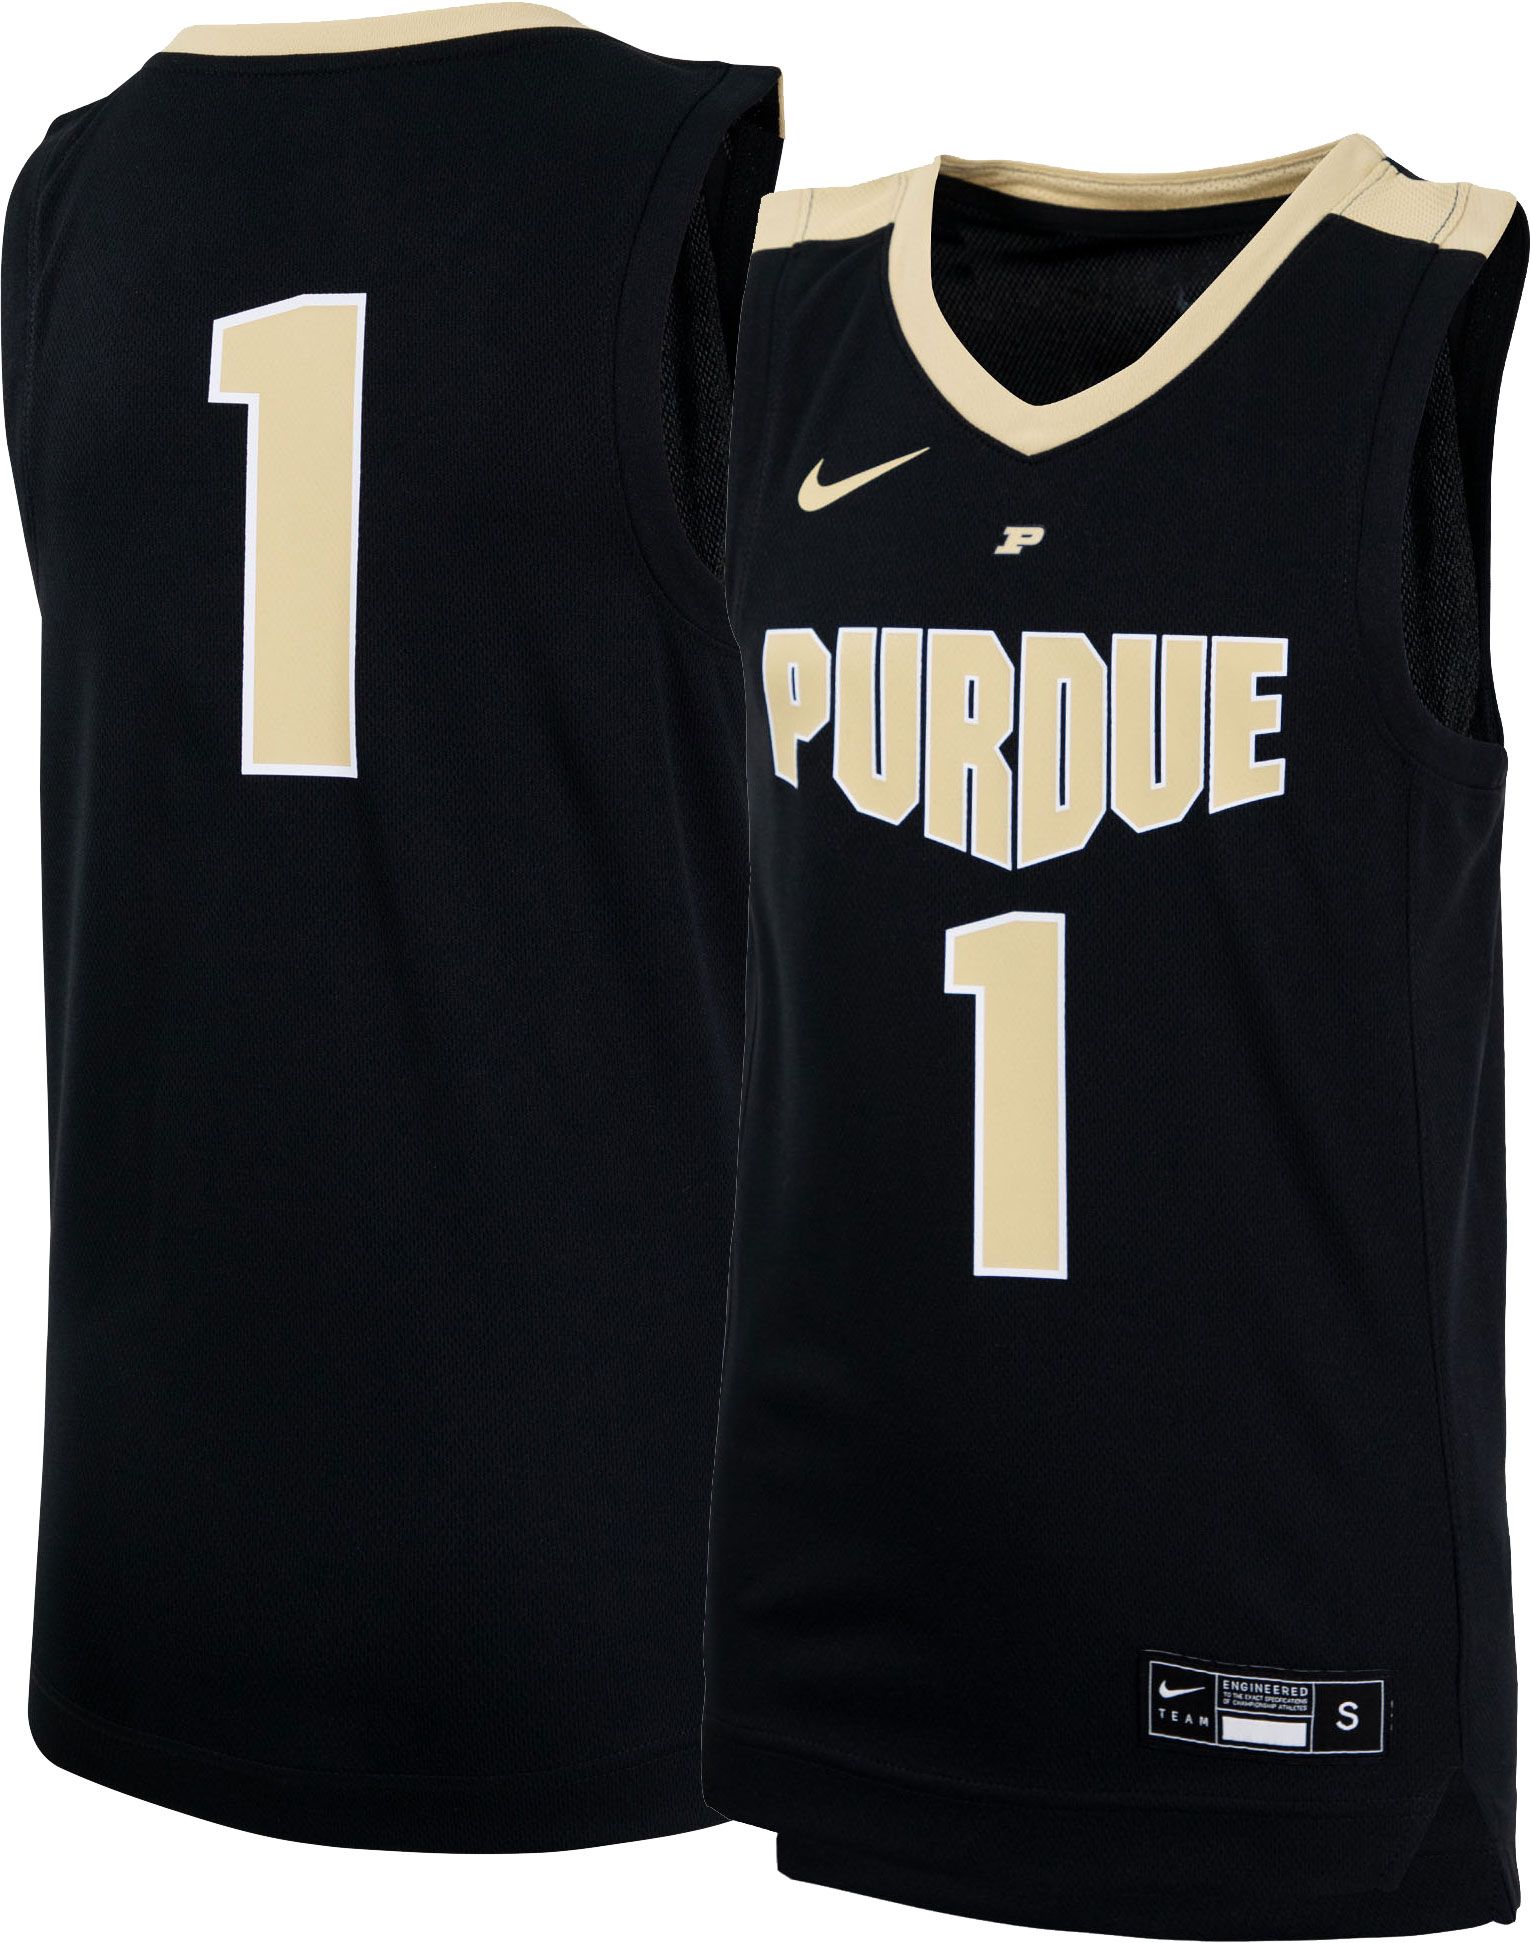 purdue youth basketball jersey